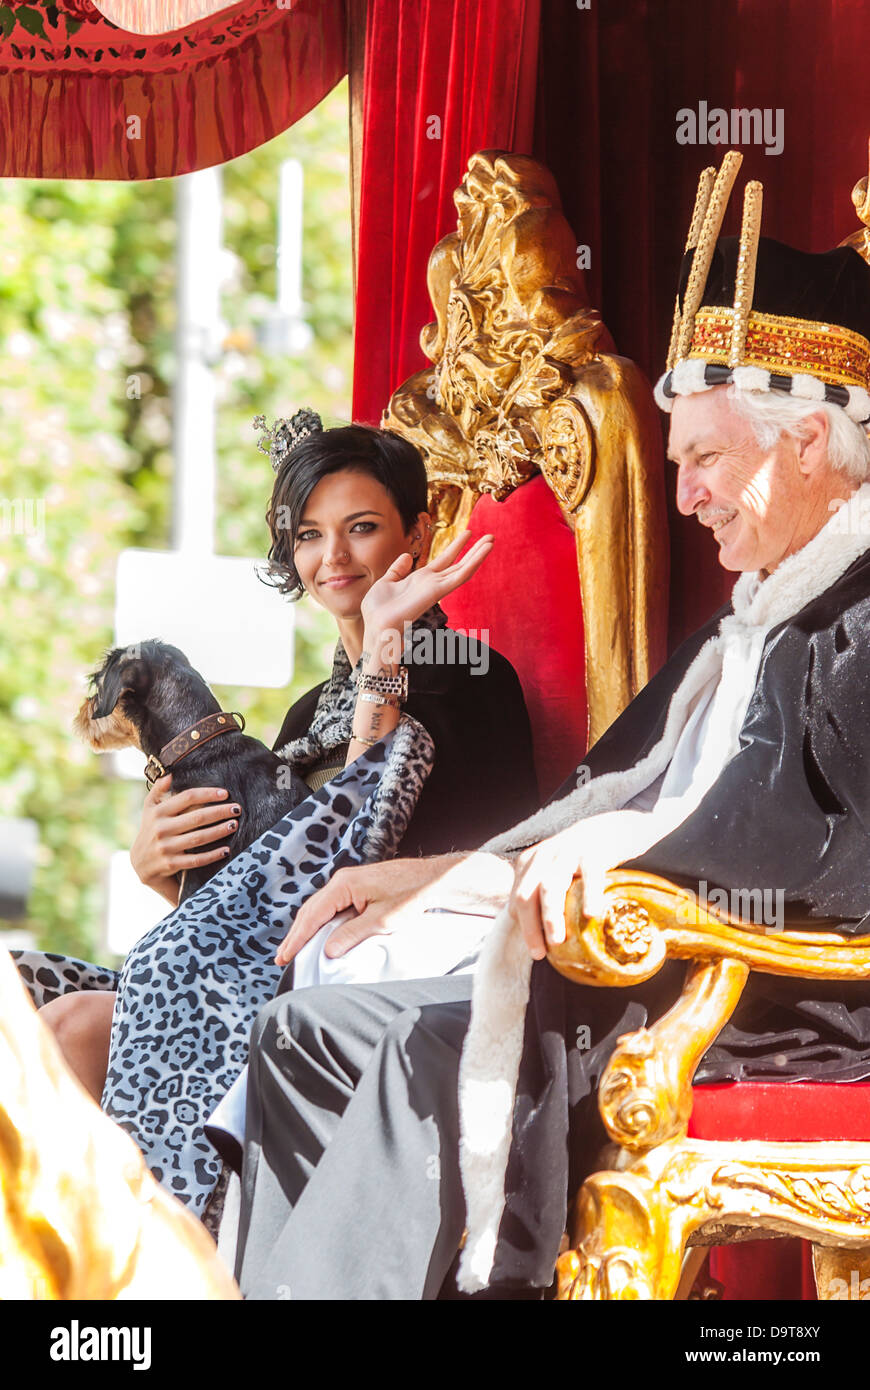 The King and Queen of Moomba feature in the parade for the Moomba festival, only in Melbourne Australia. Stock Photo